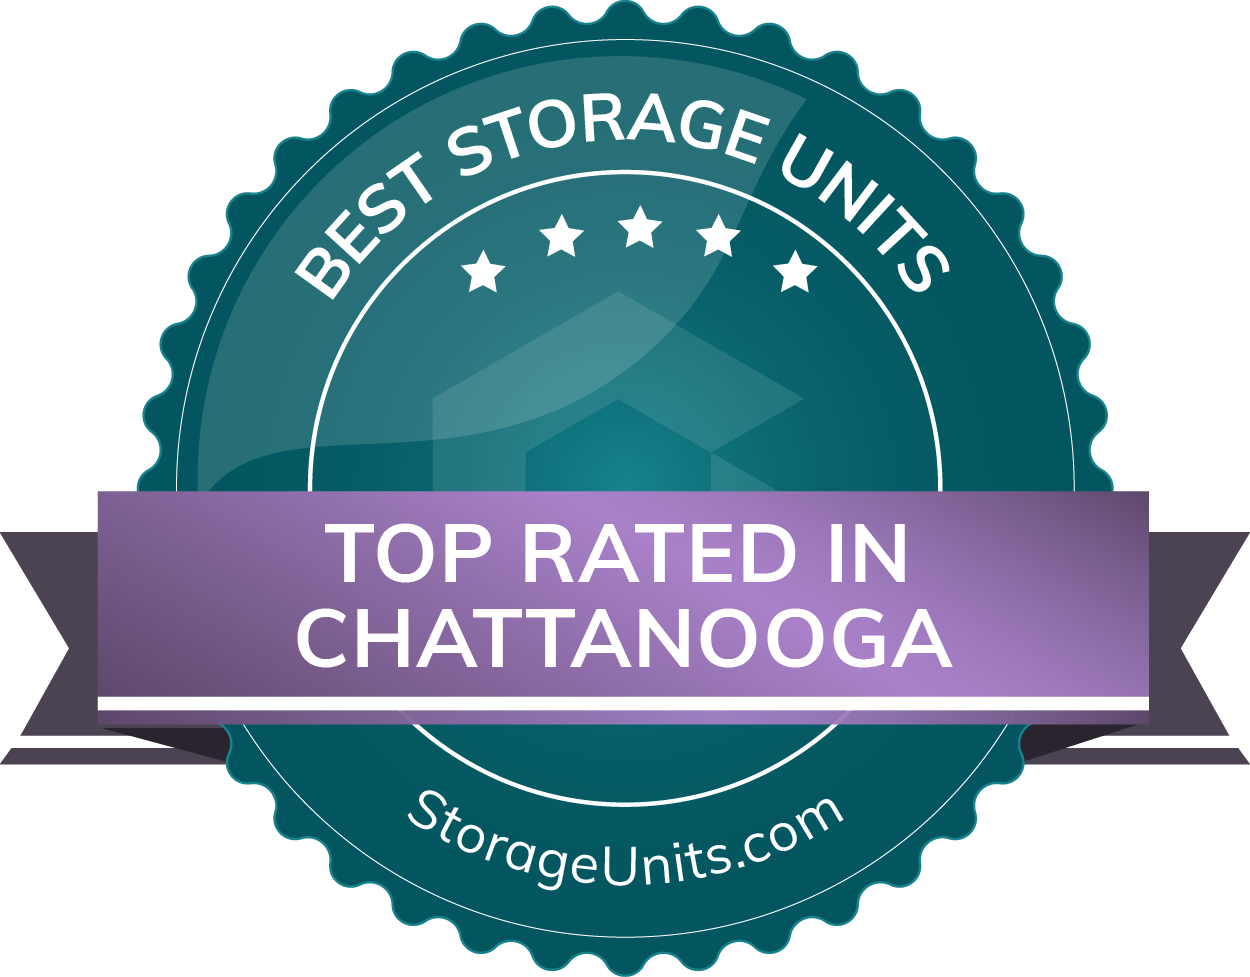 Best Self Storage Units in Chattanooga, Tennessee of 2022